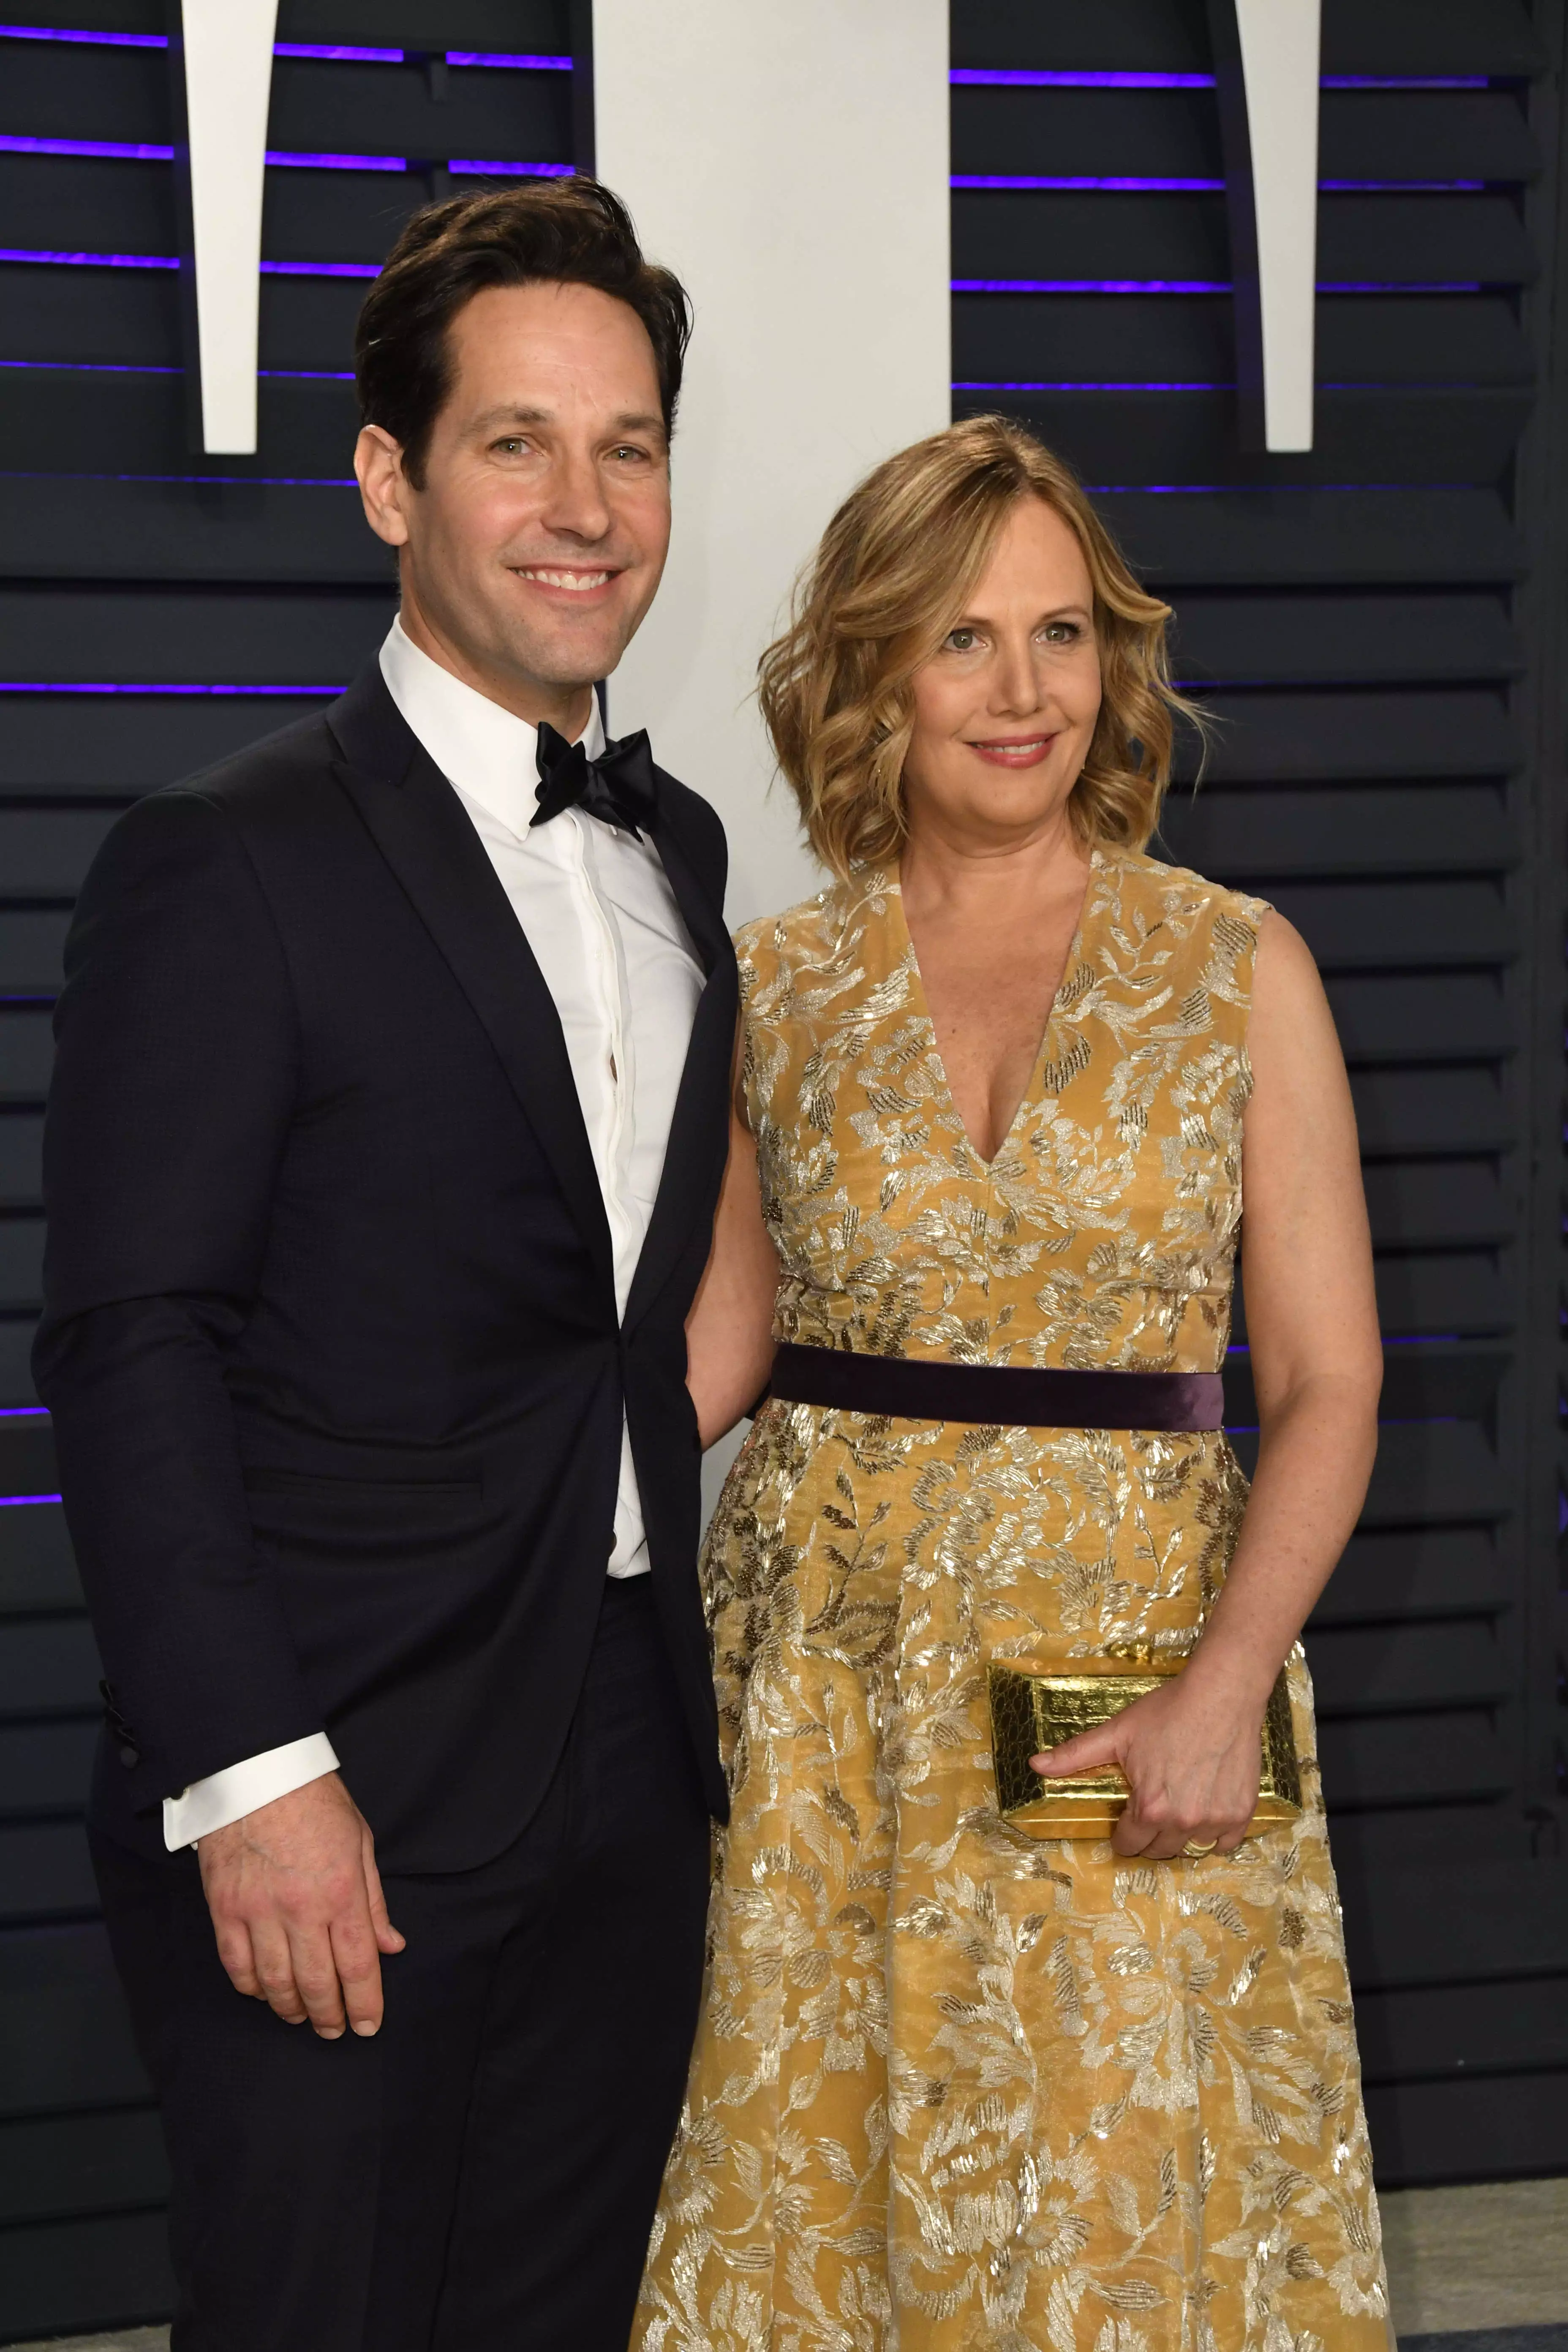 Paul Rudd and his wife Julie Yeager. (